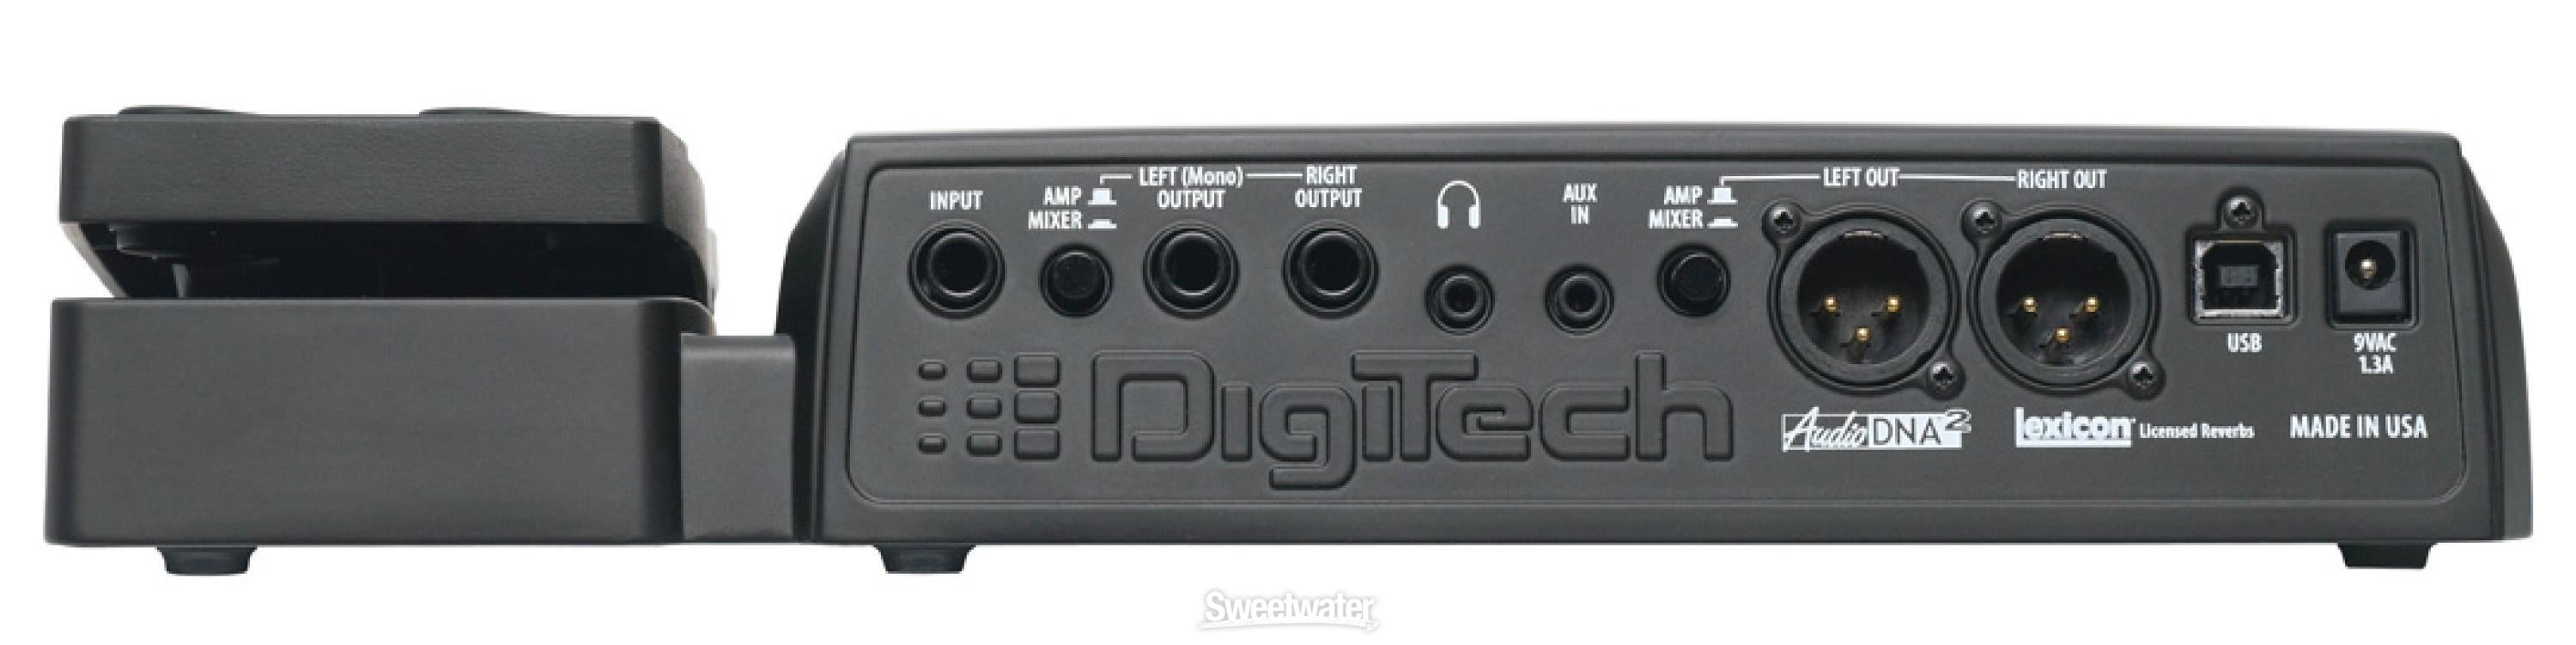 DigiTech RP355 Guitar Multi Effects Pedal with Expression Pedal ...